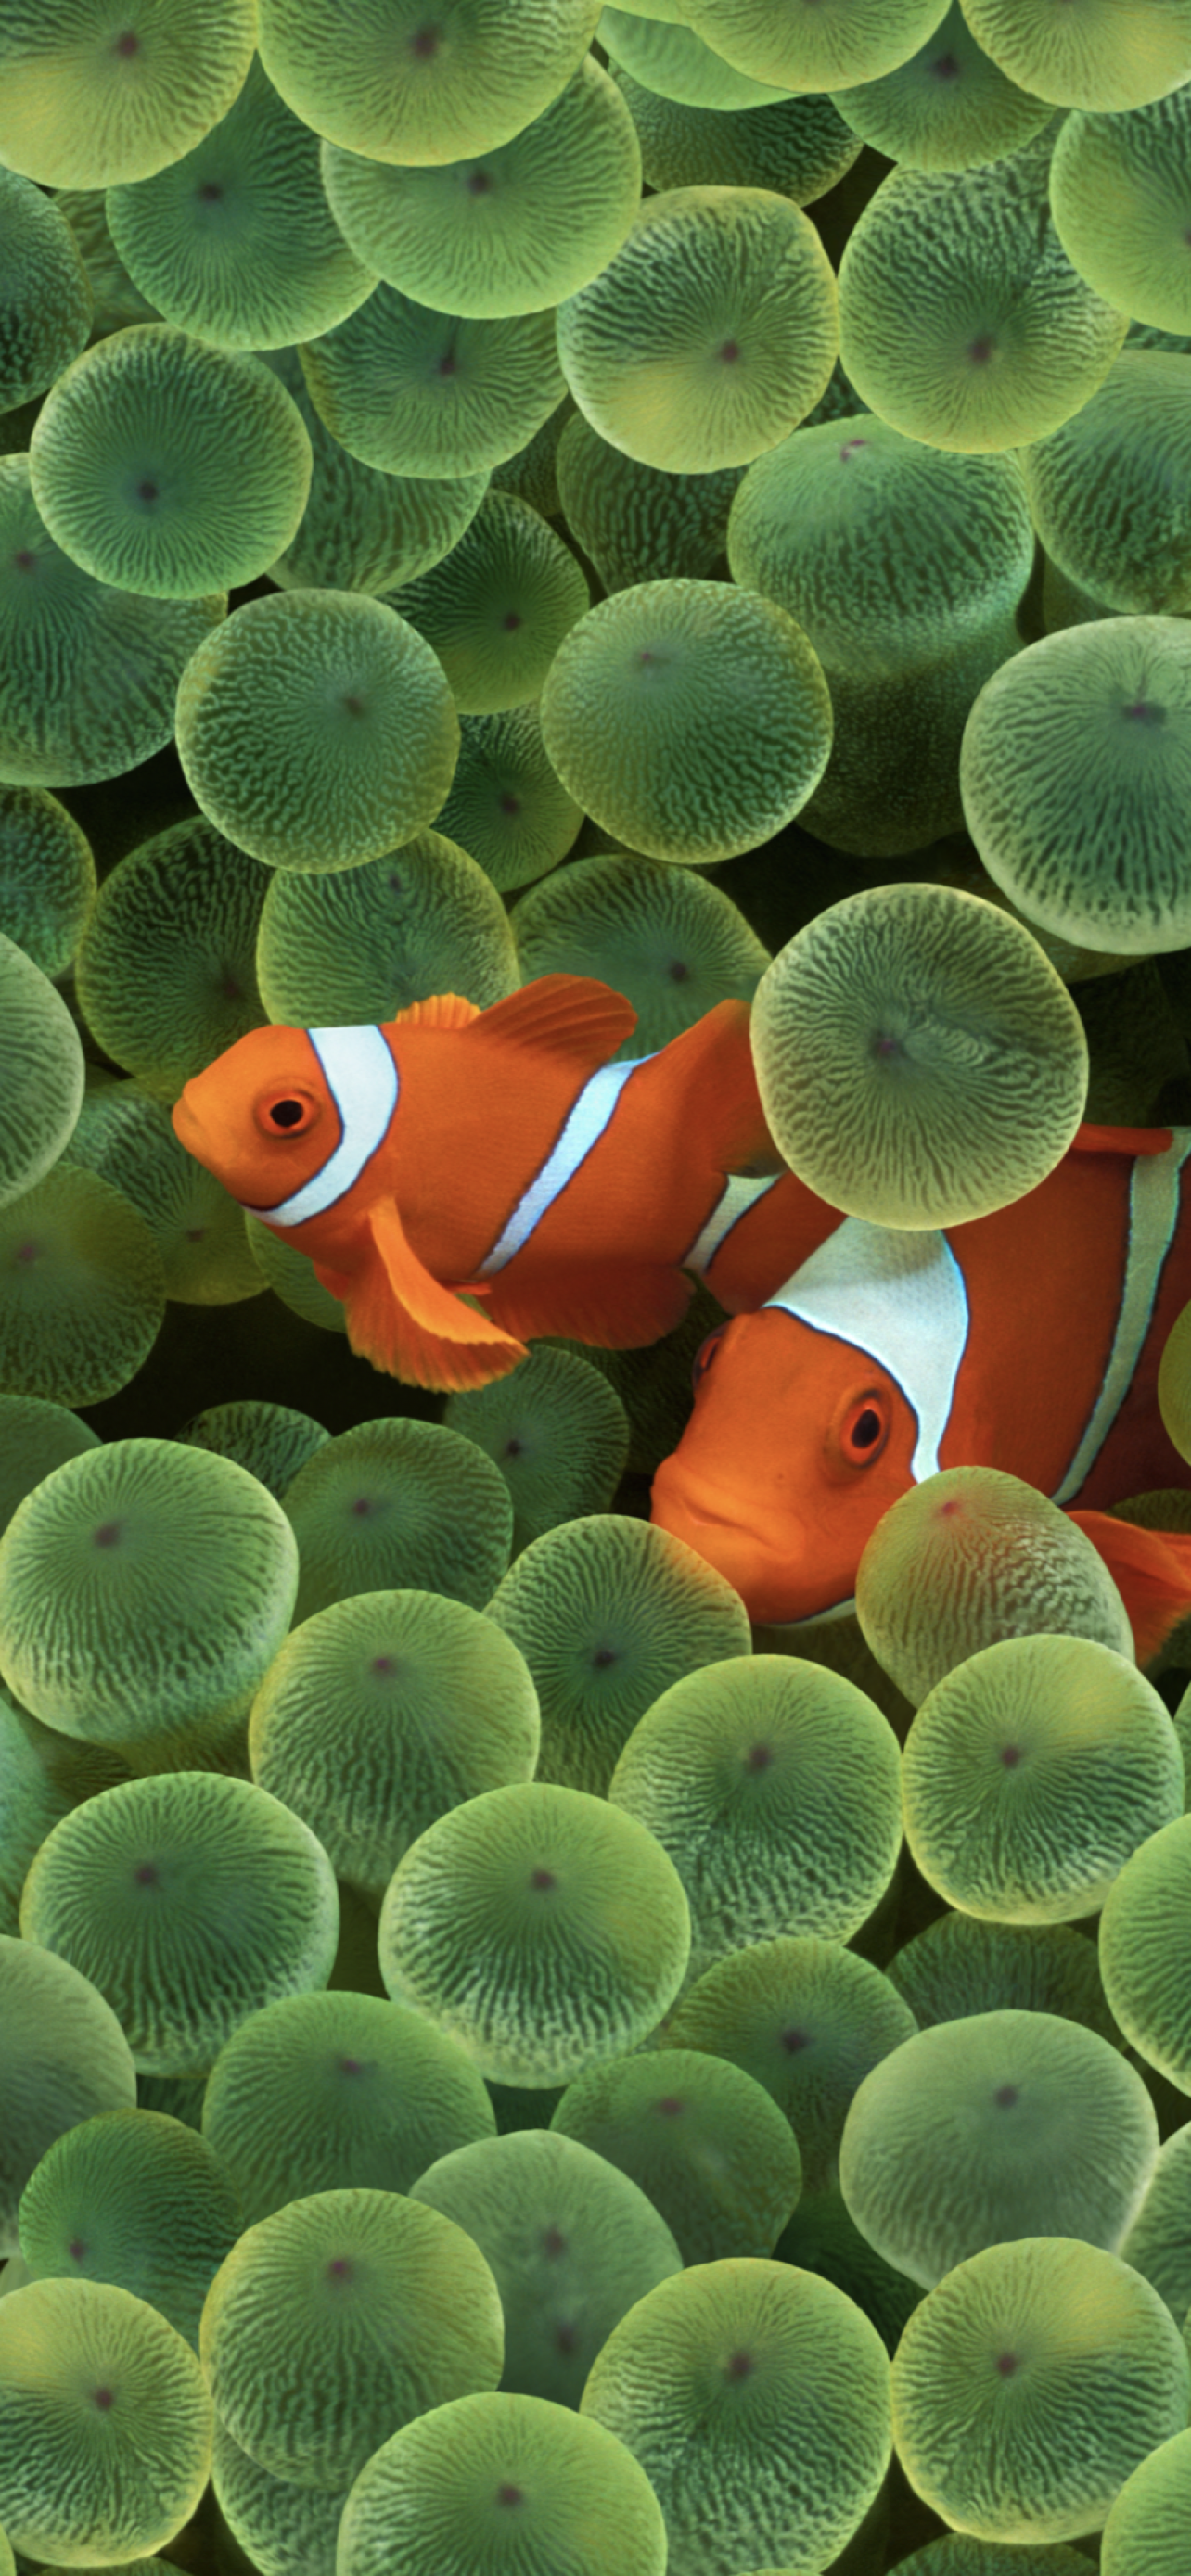 iOS 16 includes clownfish wallpaper from original iPhone